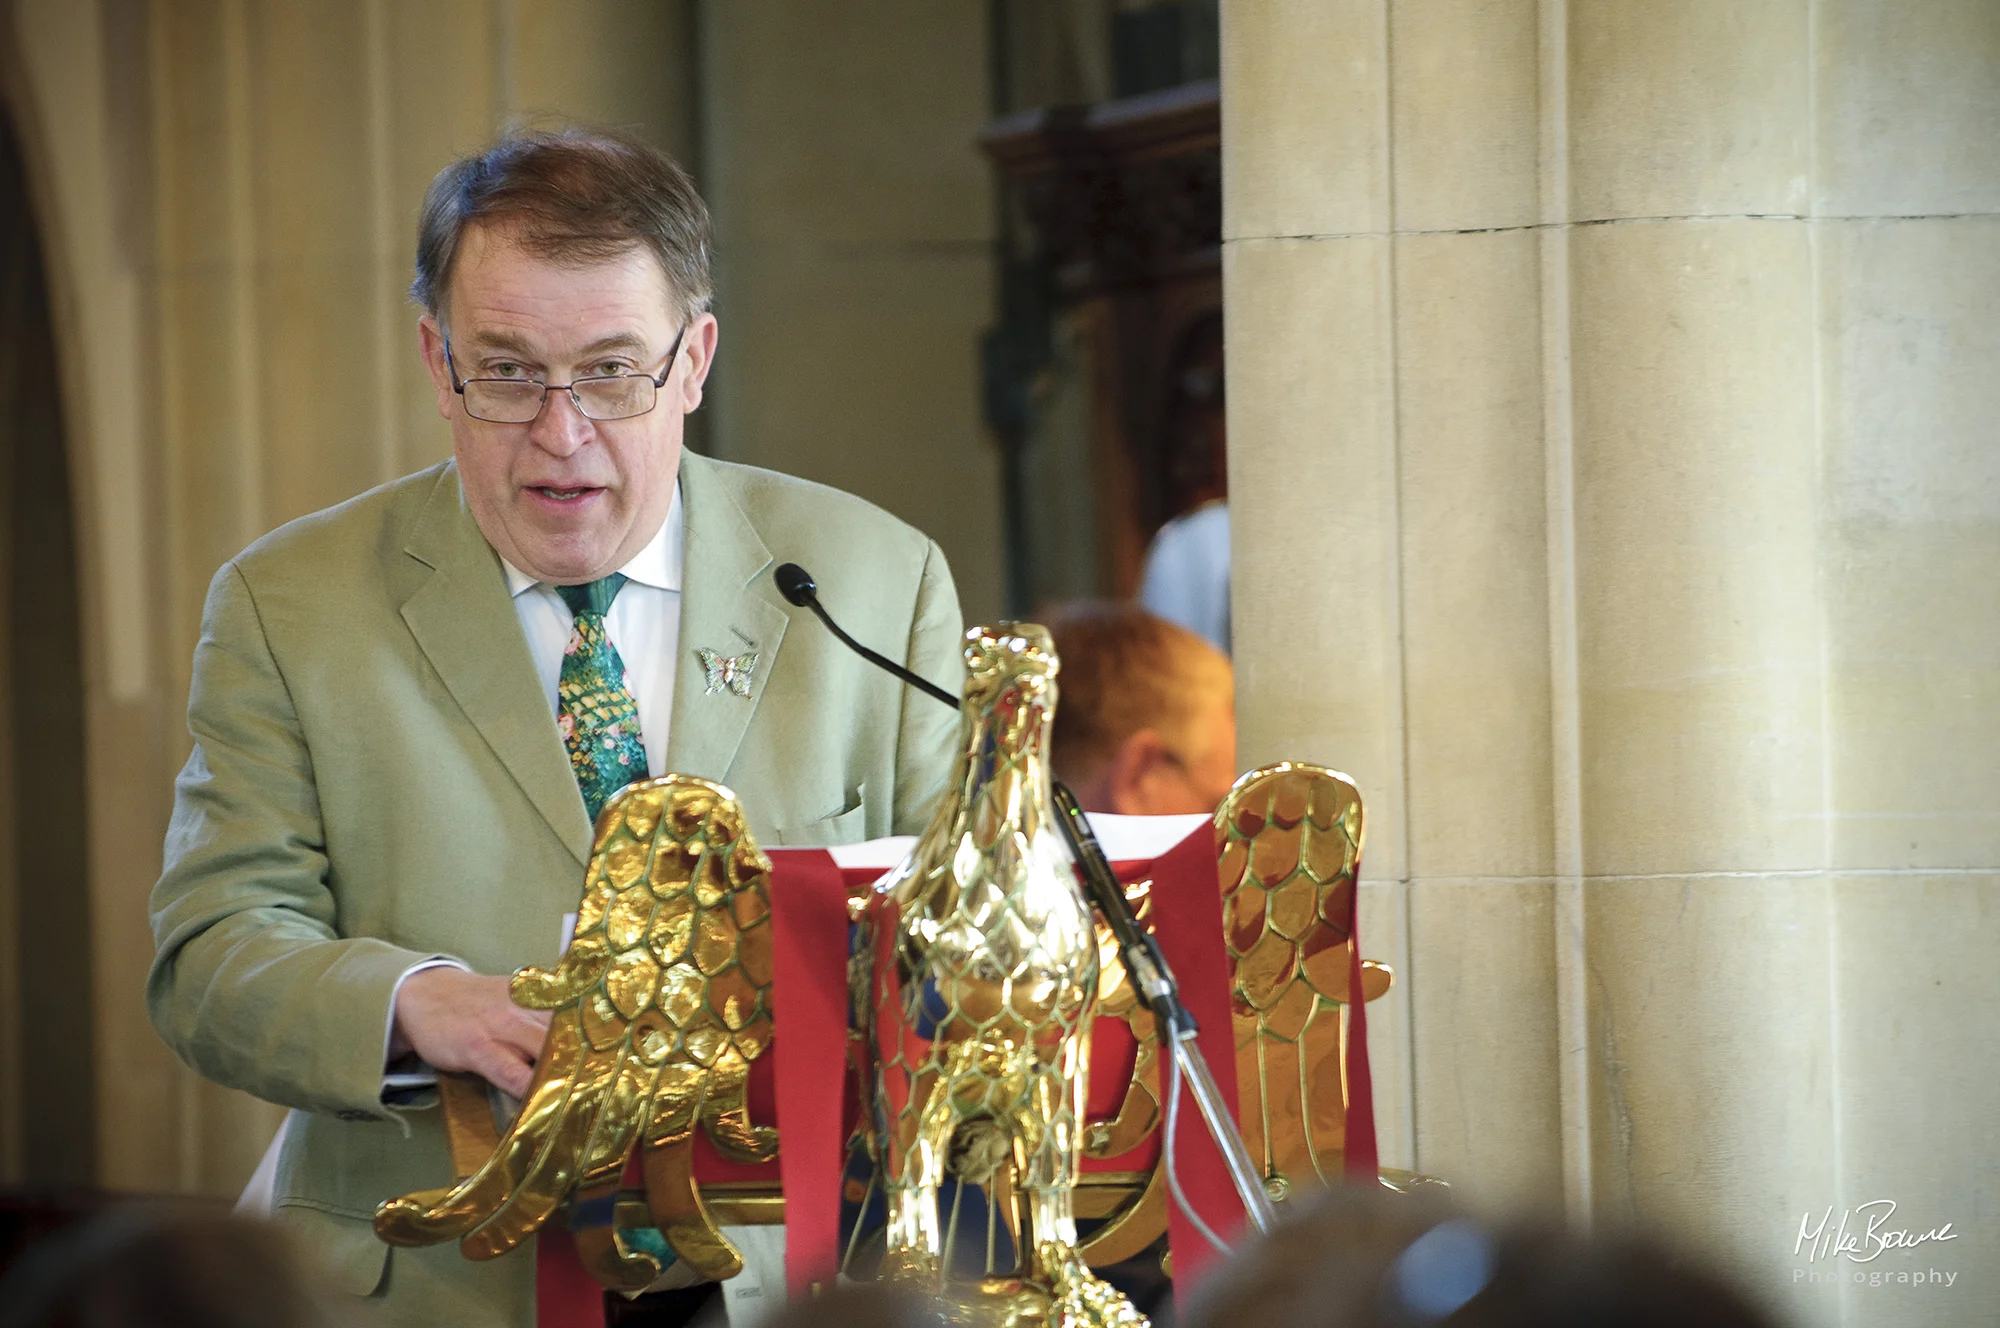 Man in glasses speaks to the congregation from the church lectern